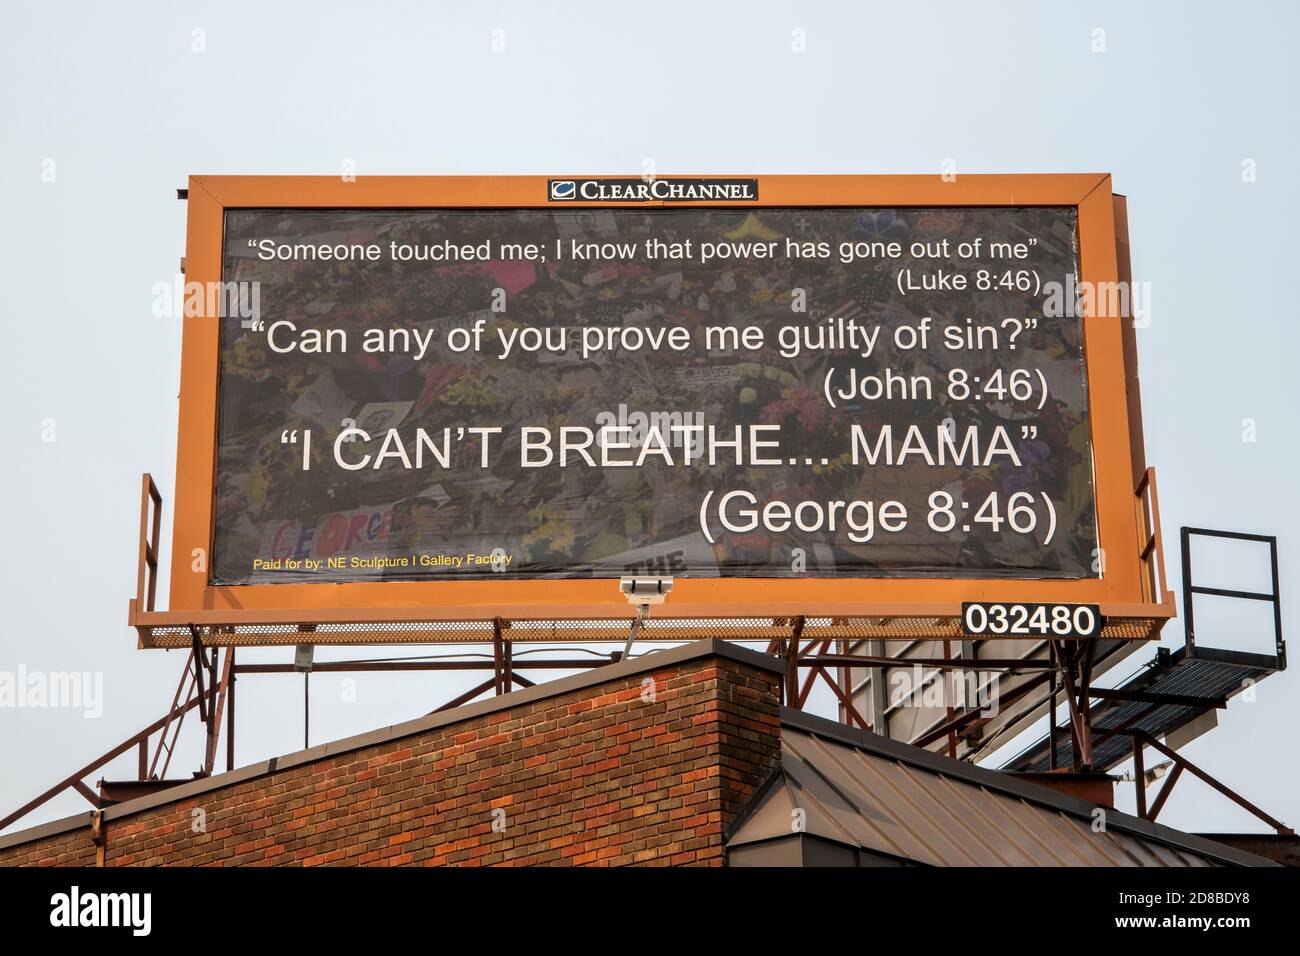 Minneapolis, MN. I can't breathe billboard sign at George Floyd memorial site. Stock Photo